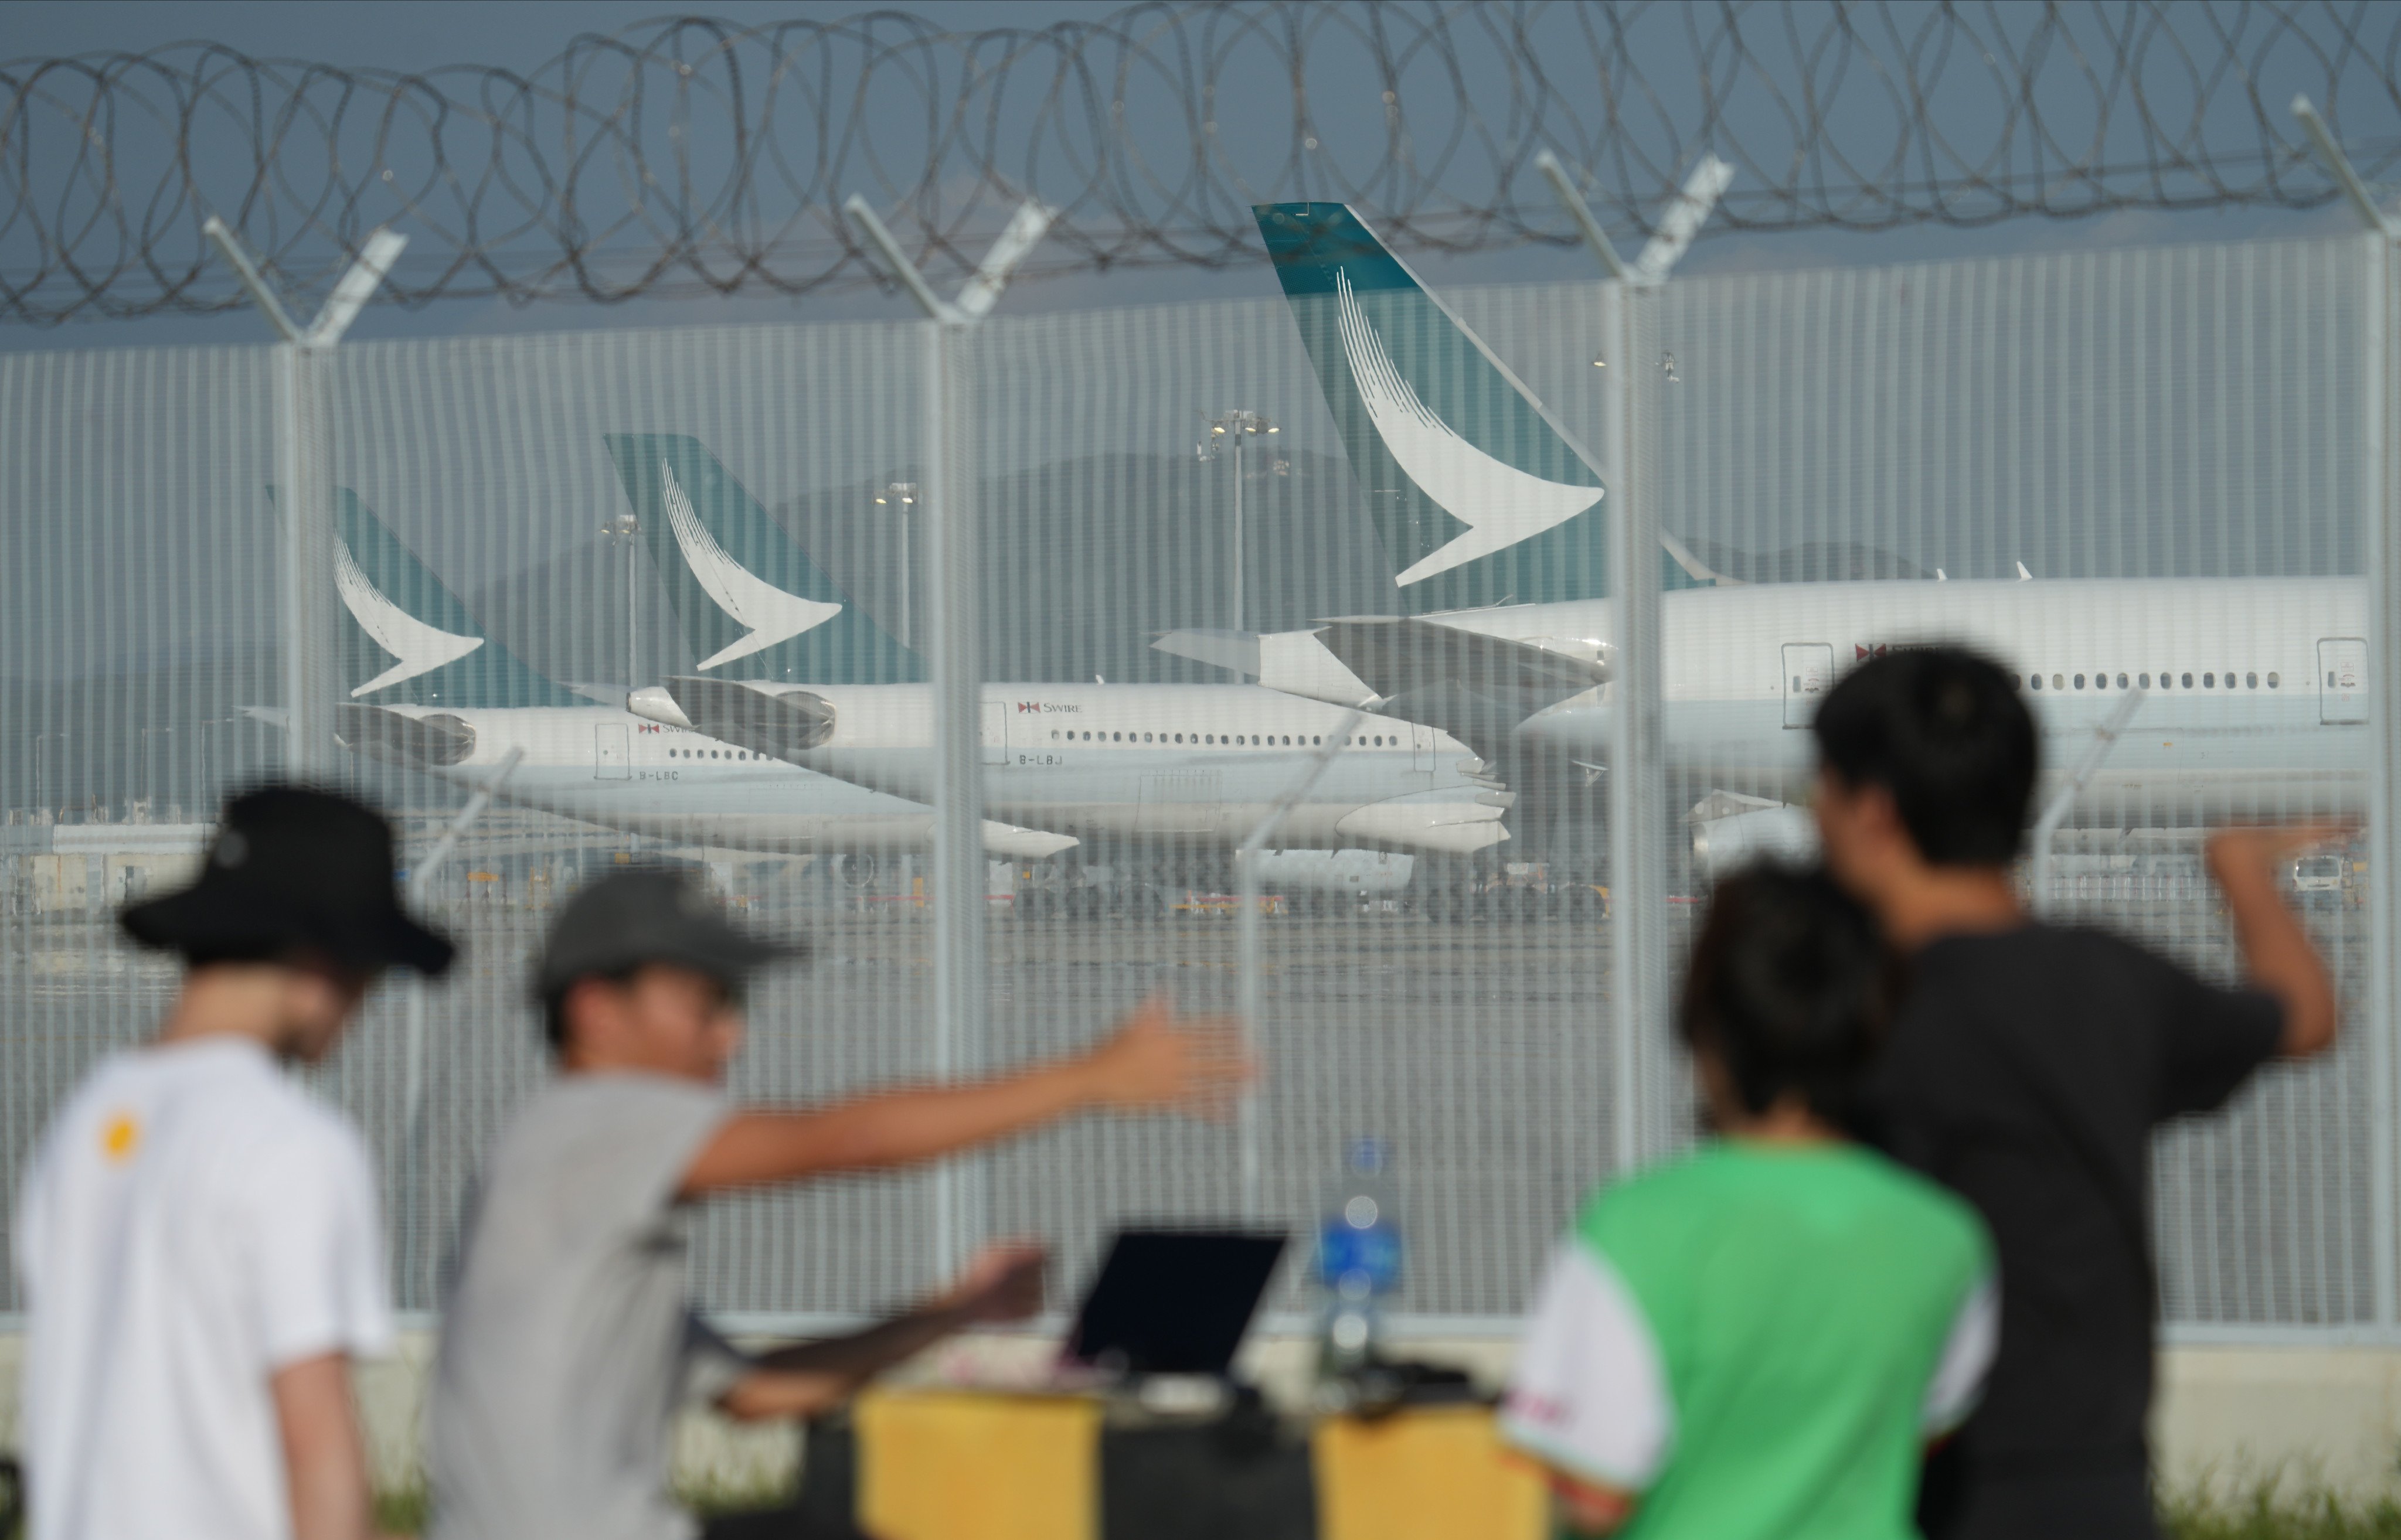 Cathay Pacific airplanes are parked on at the Hong Kong International Airport in Chek Lap Kok on September 20 last year. Cathay is still Hong Kong’s flagship carrier and an integral part of making the city not just an aviation hub but also a world-class city. Photo: Sam Tsang